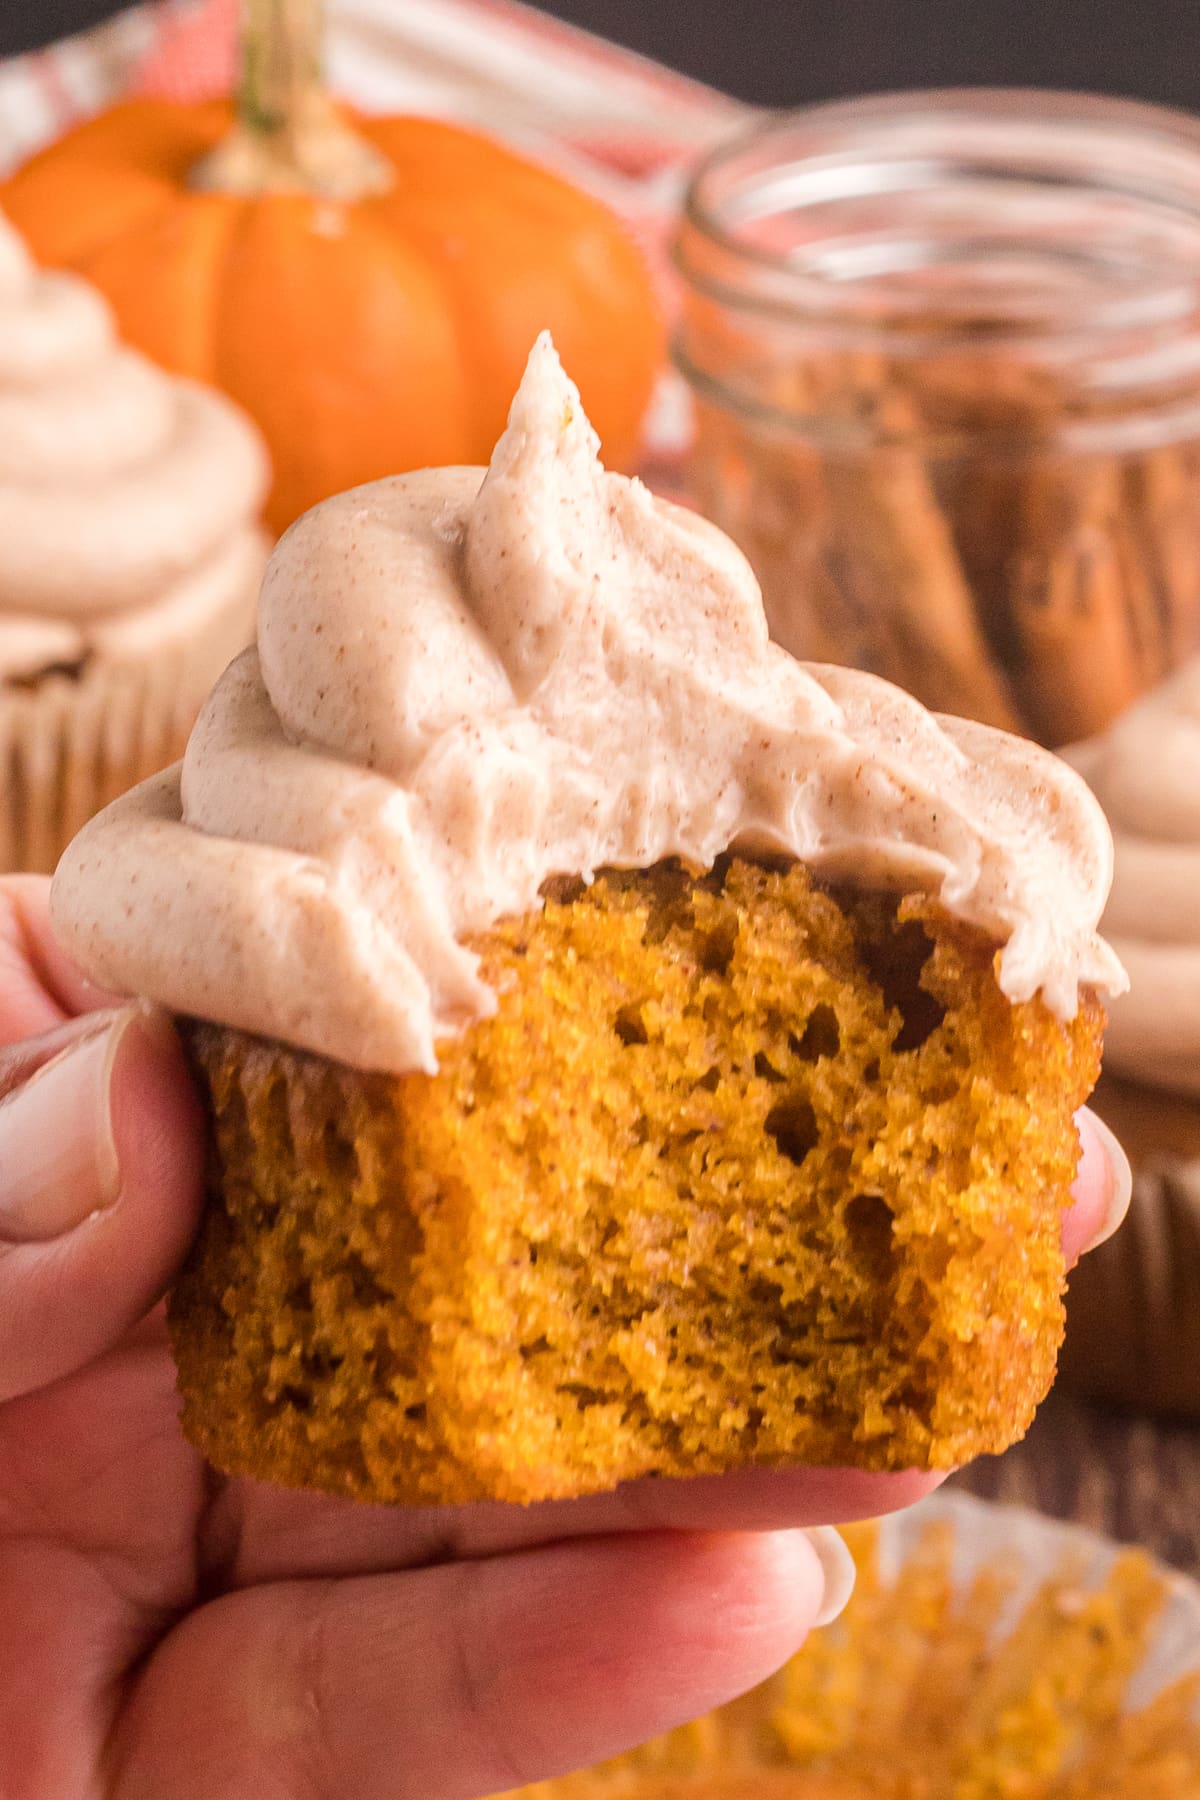 A hand holding a pumpkin cupcake with cream cheese frosting